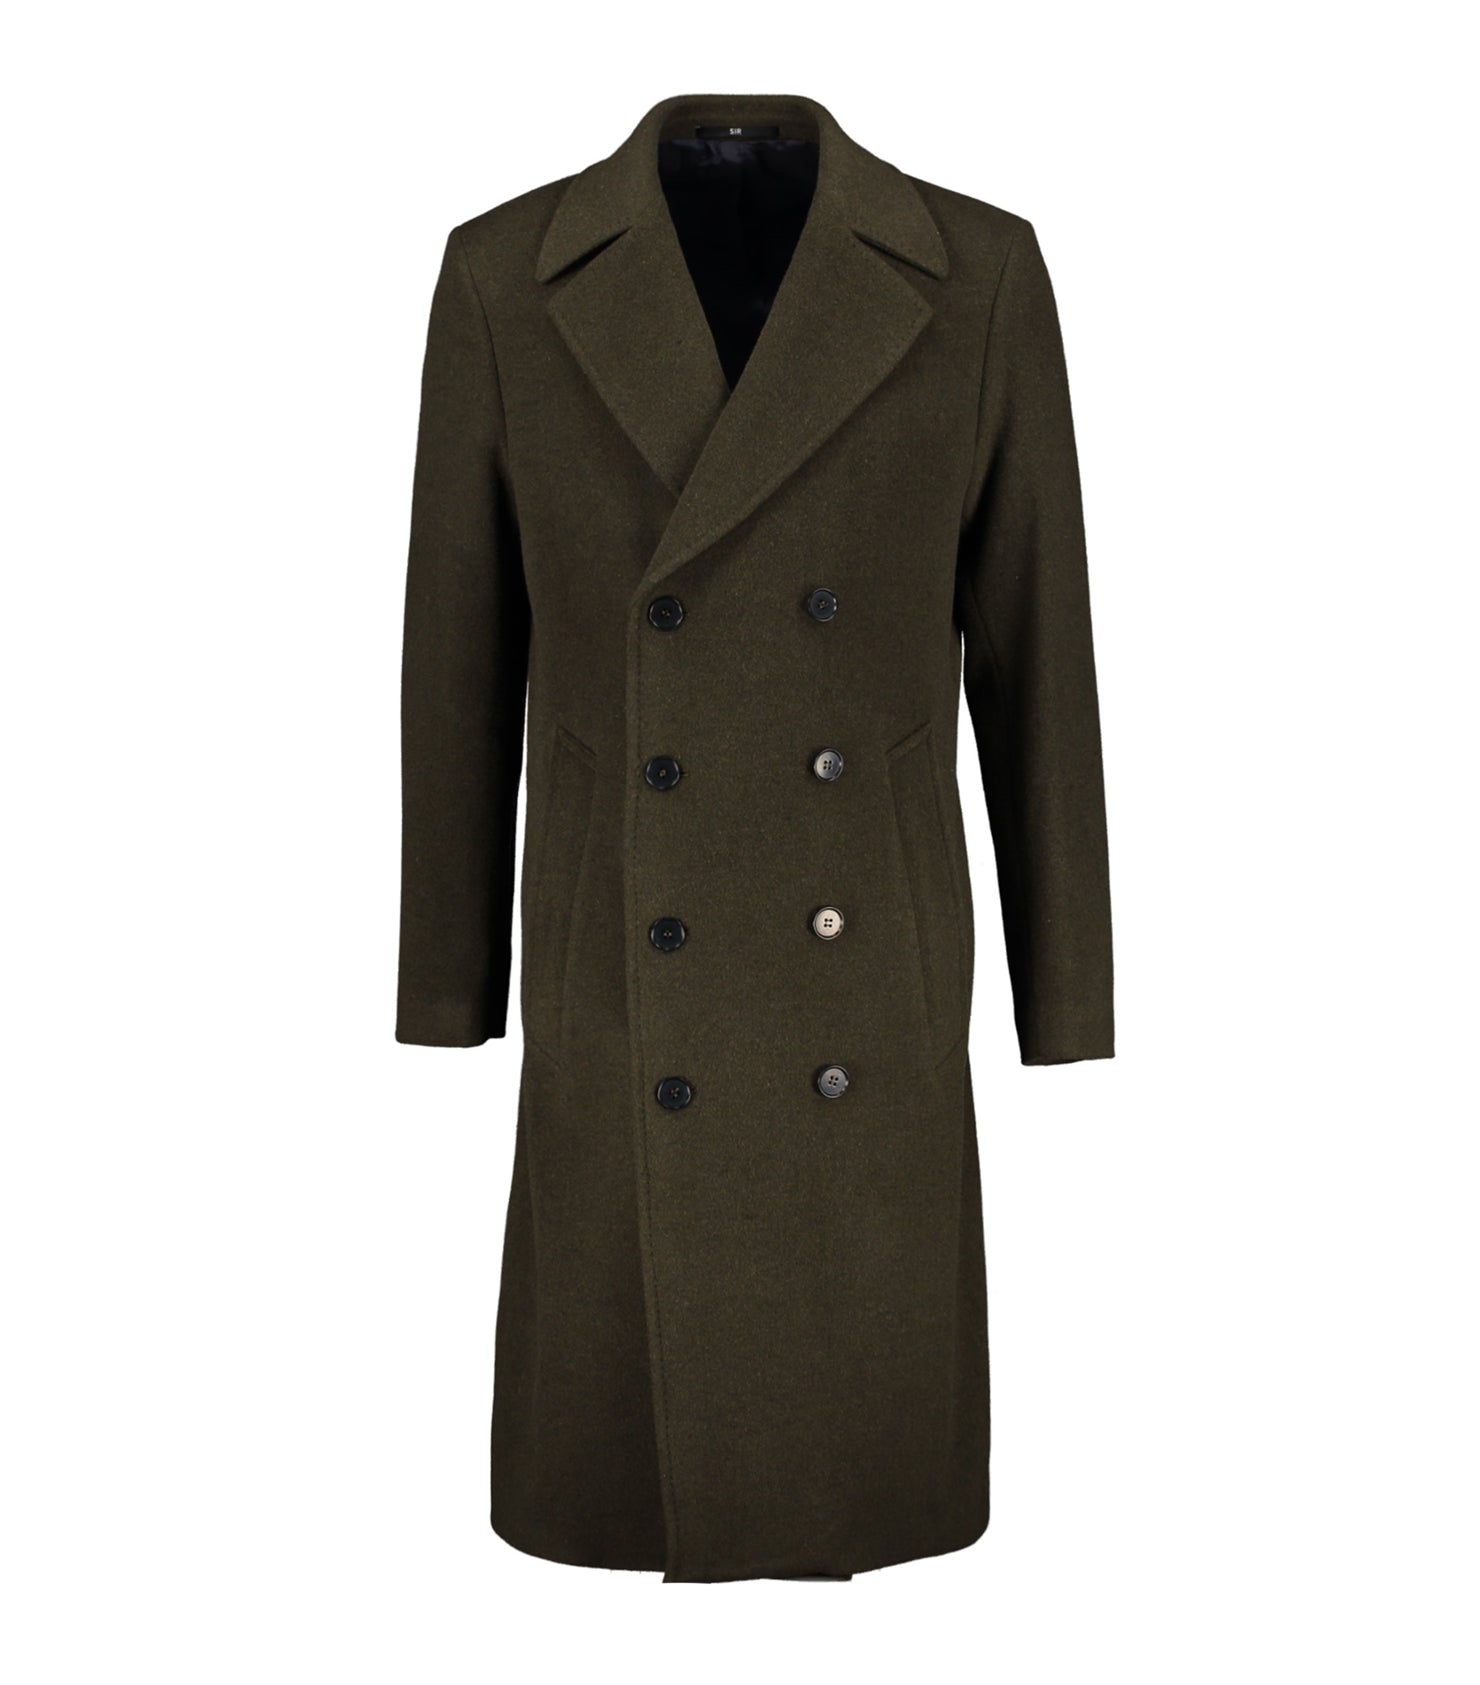 Spectre Green Double-Breasted Coat